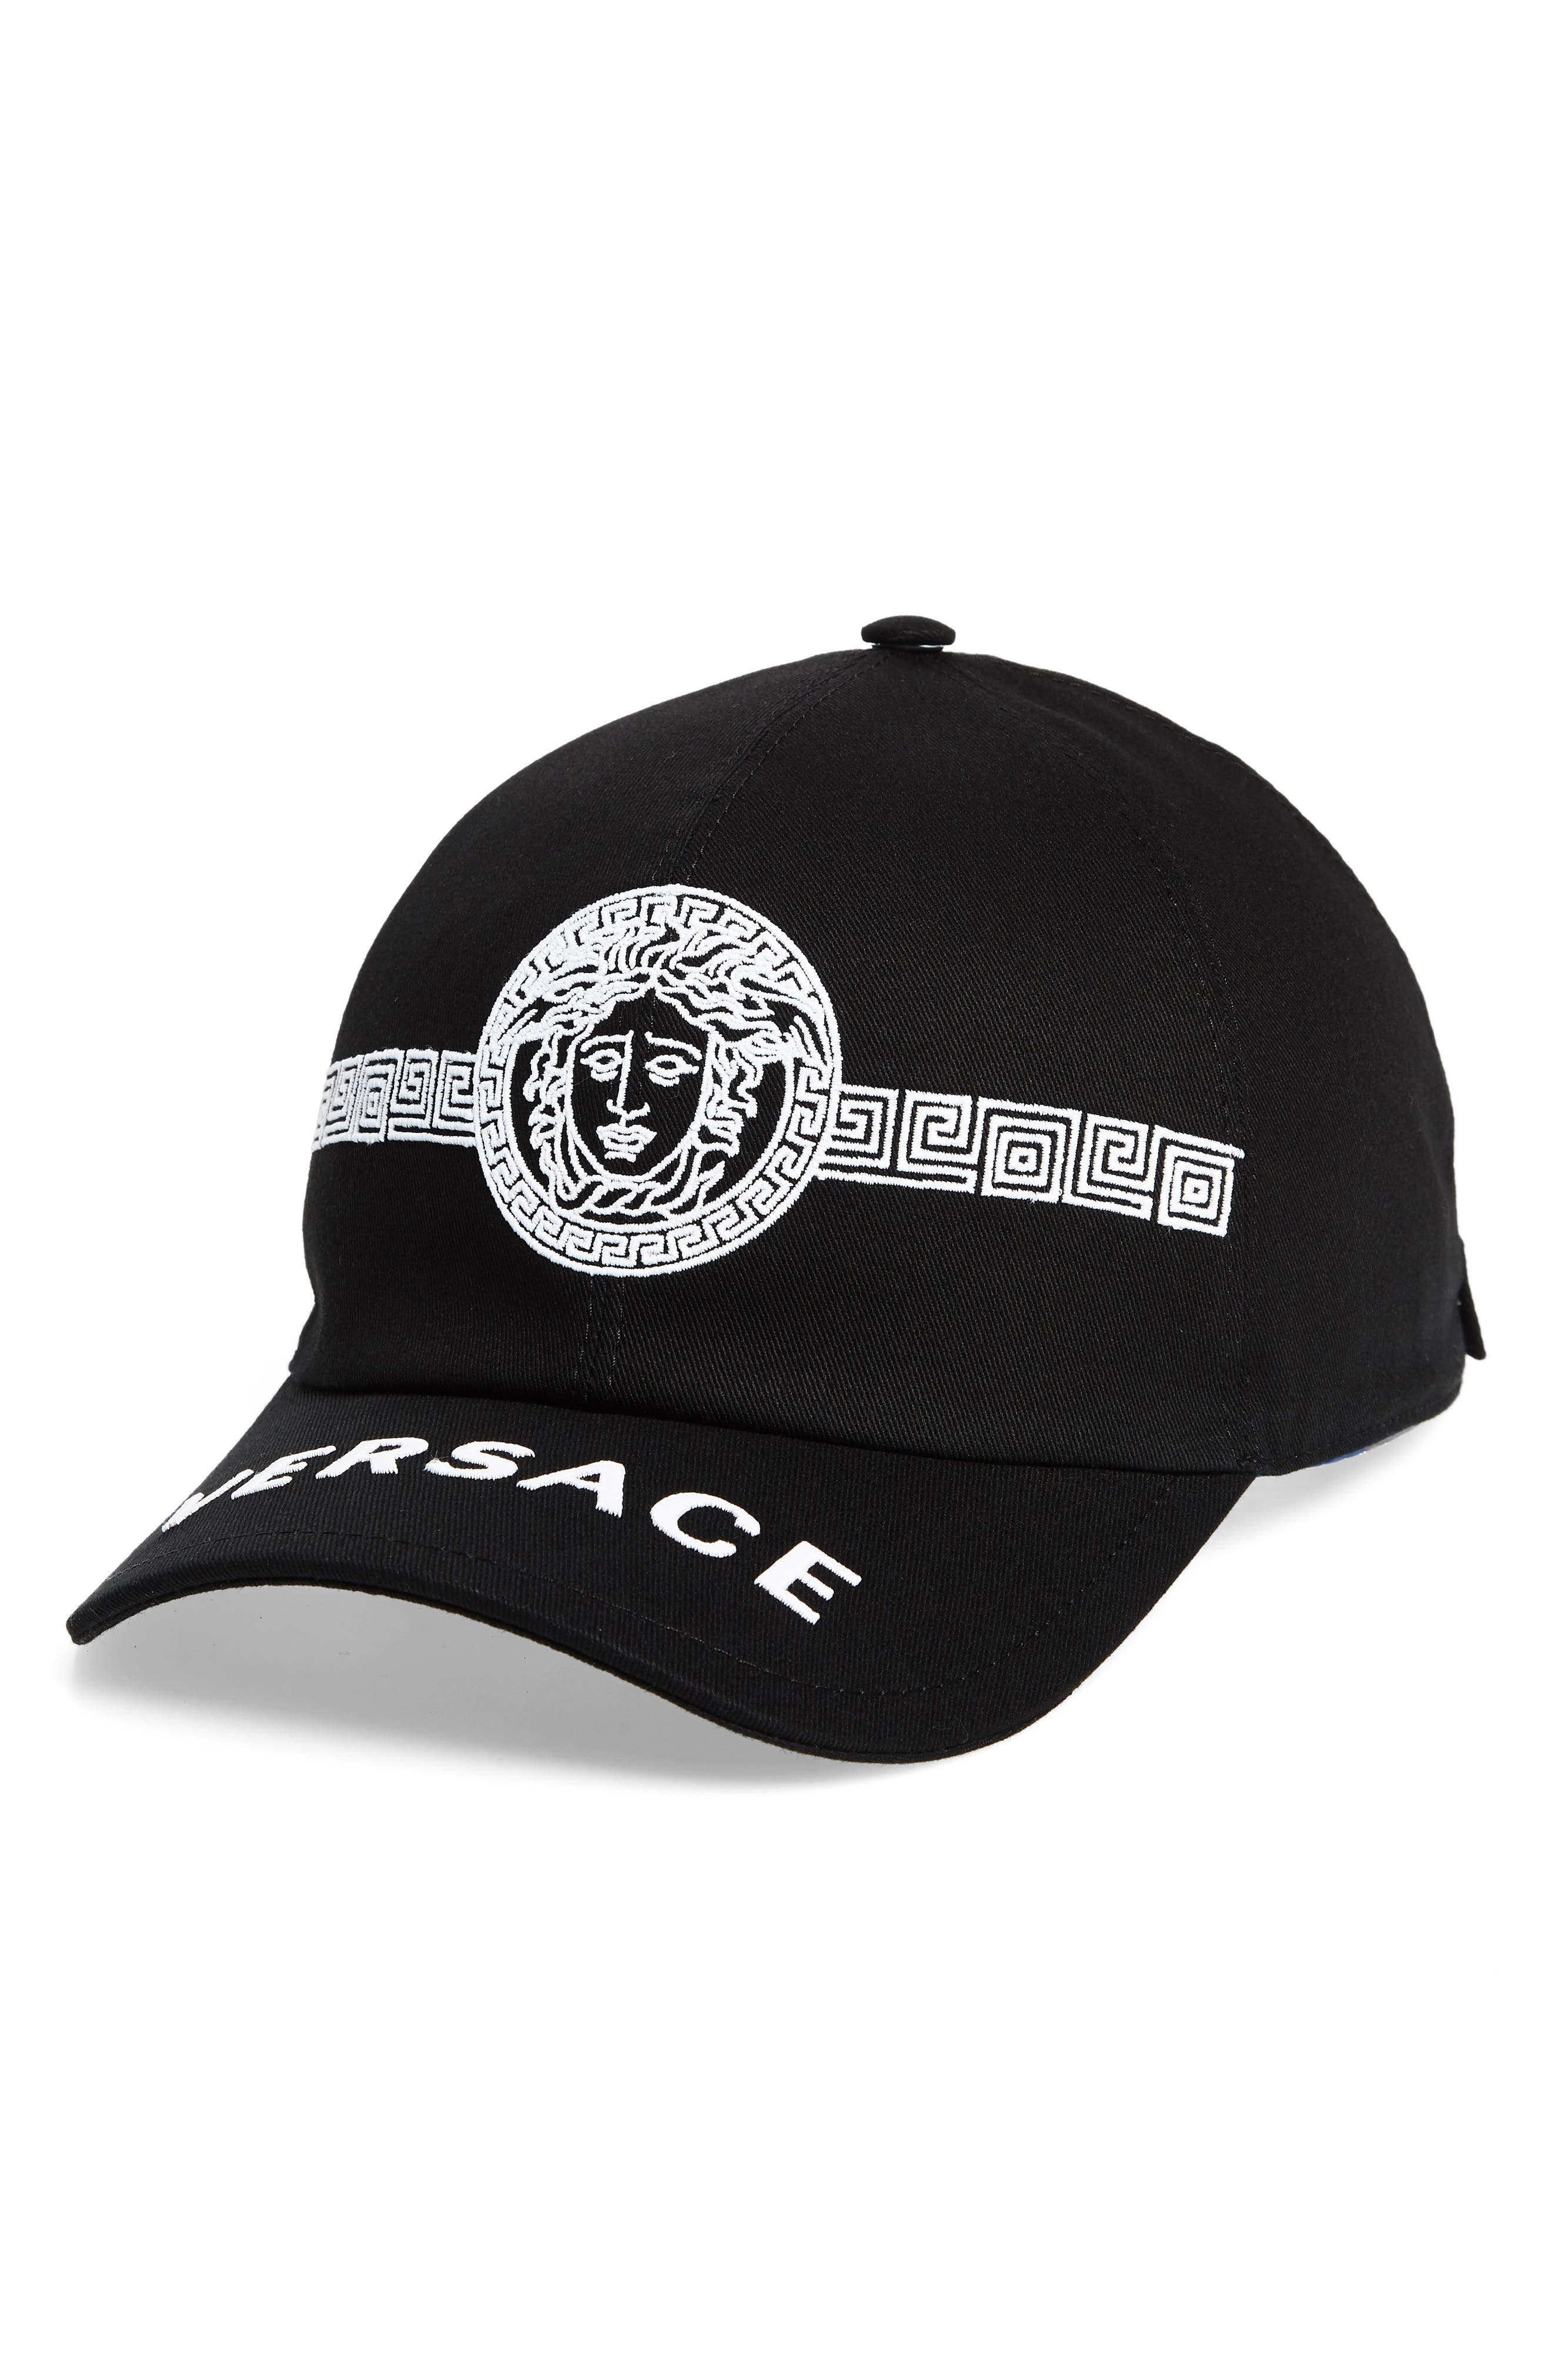 versace hat and scarf set mens